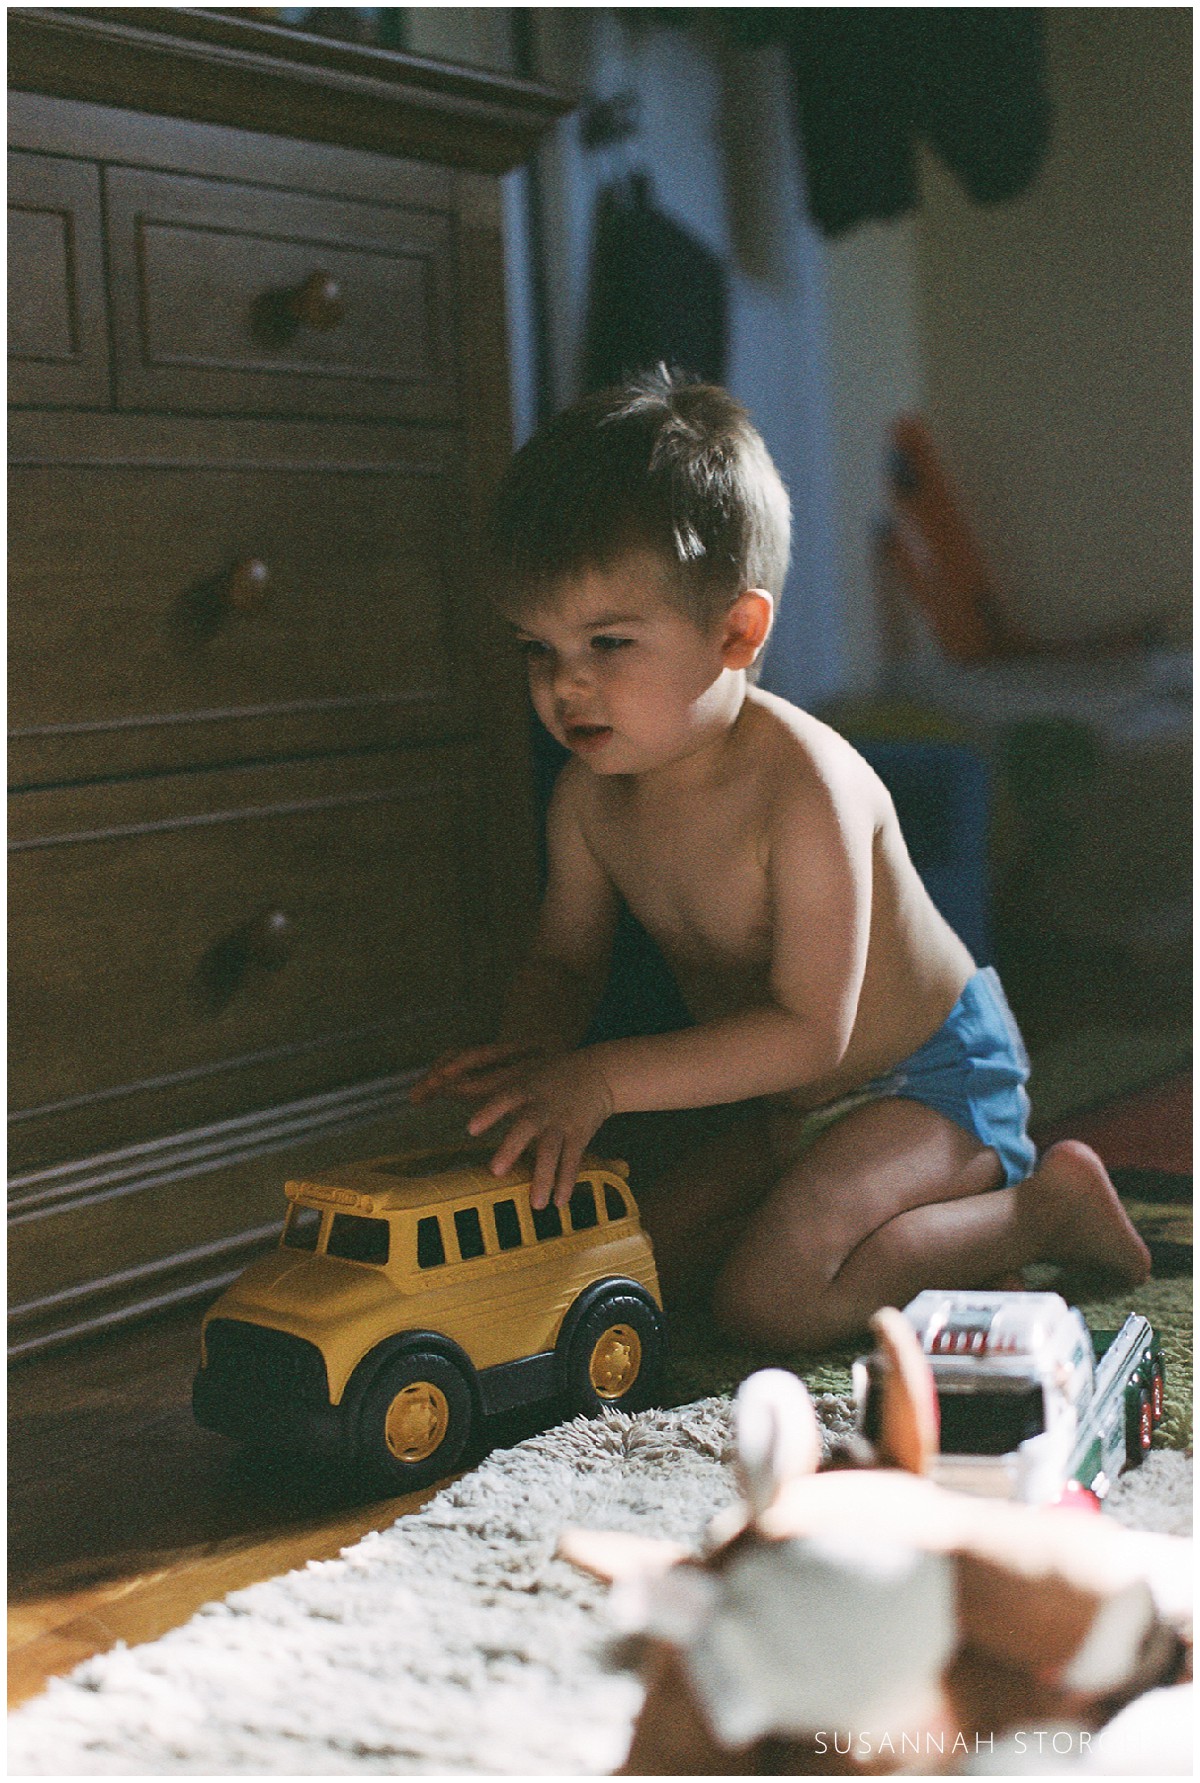 A boy plays with a toy bus during a family lifestyle session